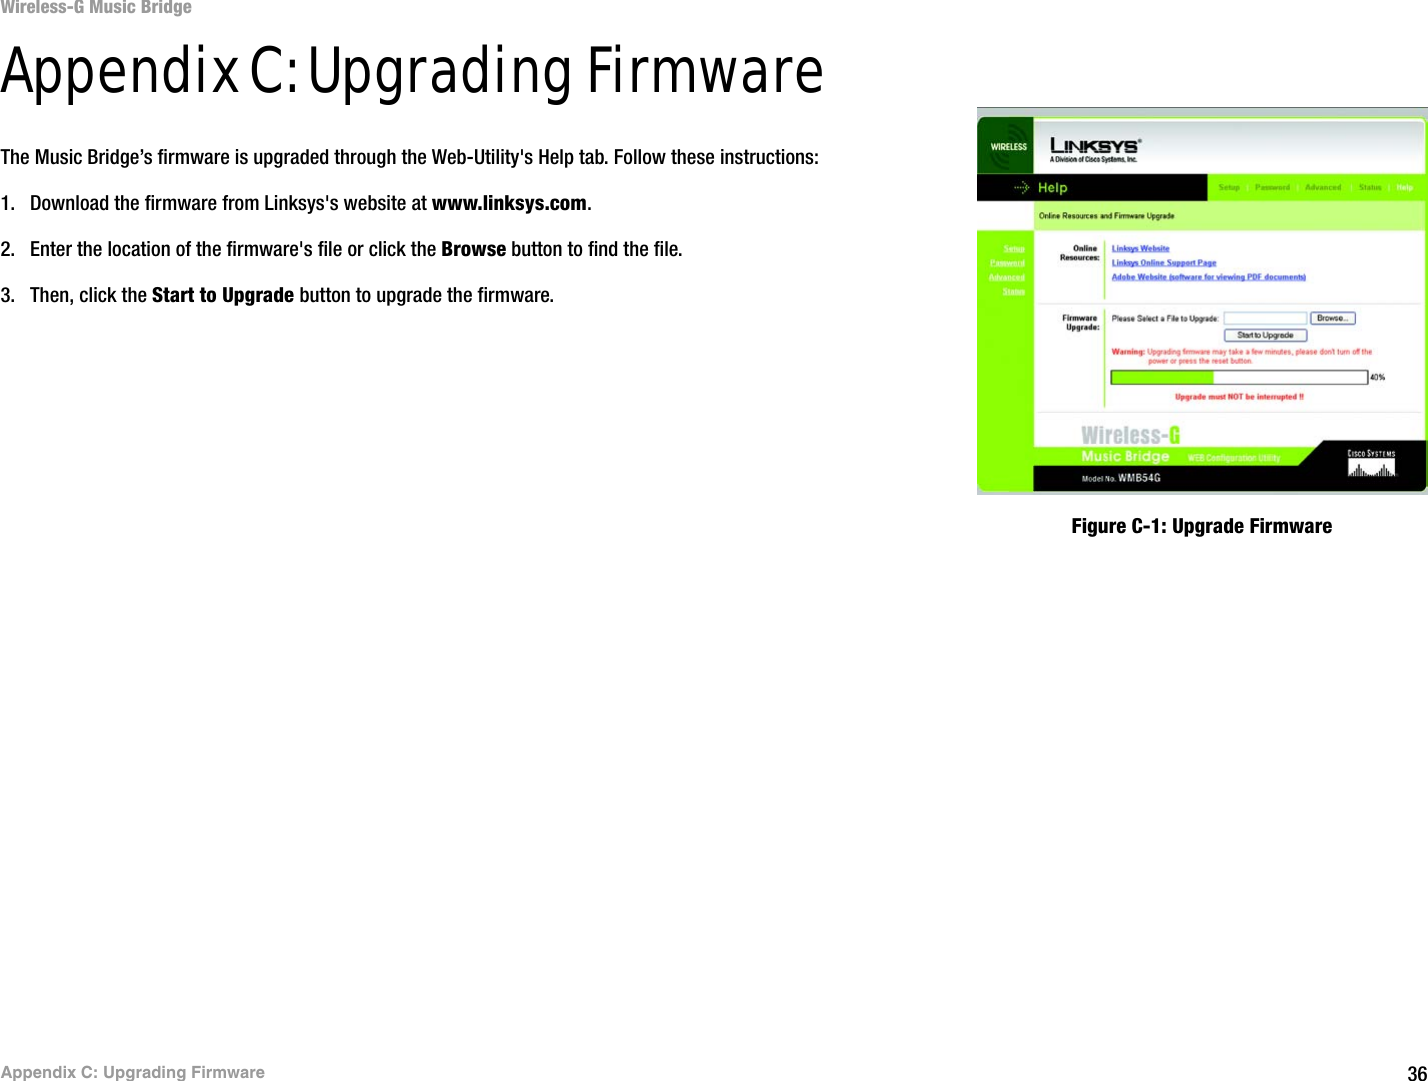 36Appendix C: Upgrading FirmwareWireless-G Music BridgeAppendix C: Upgrading FirmwareThe Music Bridge’s firmware is upgraded through the Web-Utility&apos;s Help tab. Follow these instructions:1. Download the firmware from Linksys&apos;s website at www.linksys.com. 2. Enter the location of the firmware&apos;s file or click the Browse button to find the file. 3. Then, click the Start to Upgrade button to upgrade the firmware.Figure C-1: Upgrade Firmware